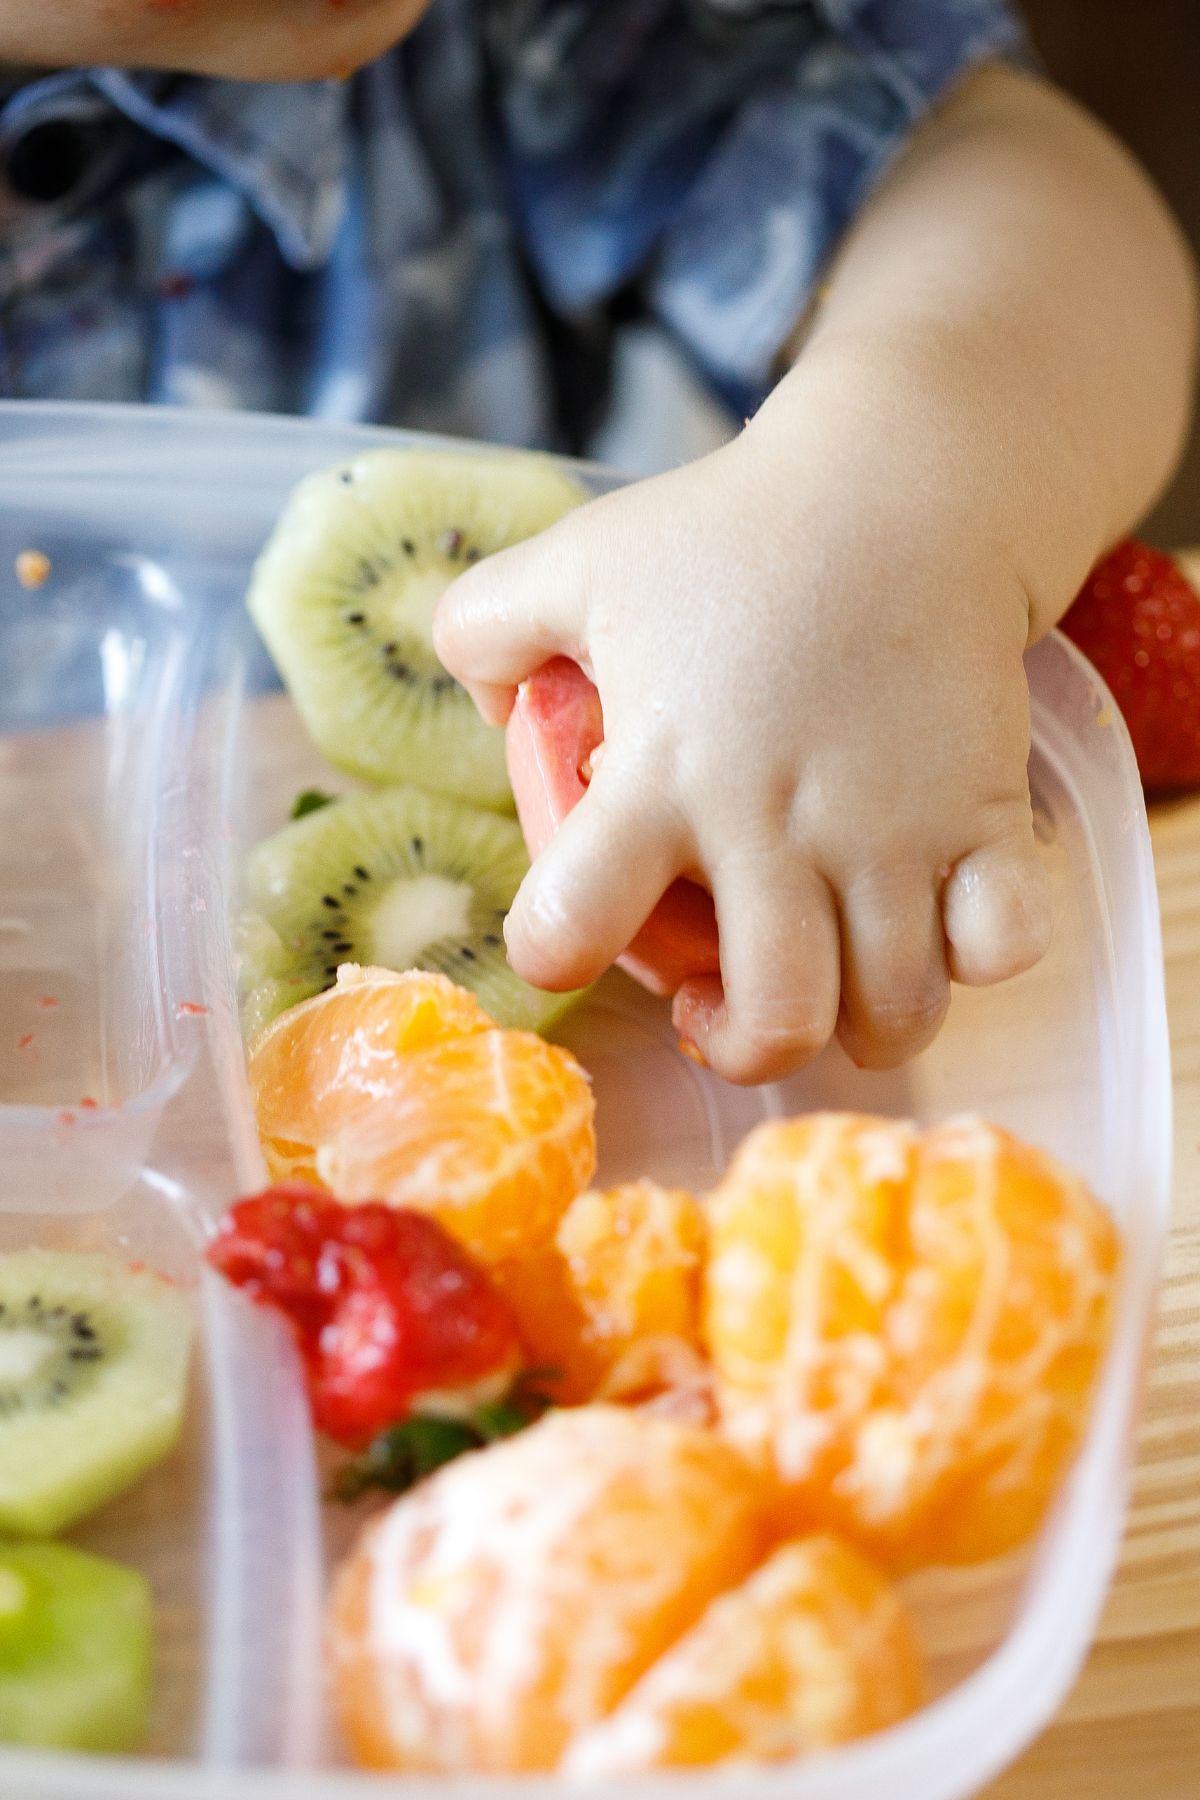 A toddler's hand grabs a piece of fruit from a plastic tray of assorted fruits.